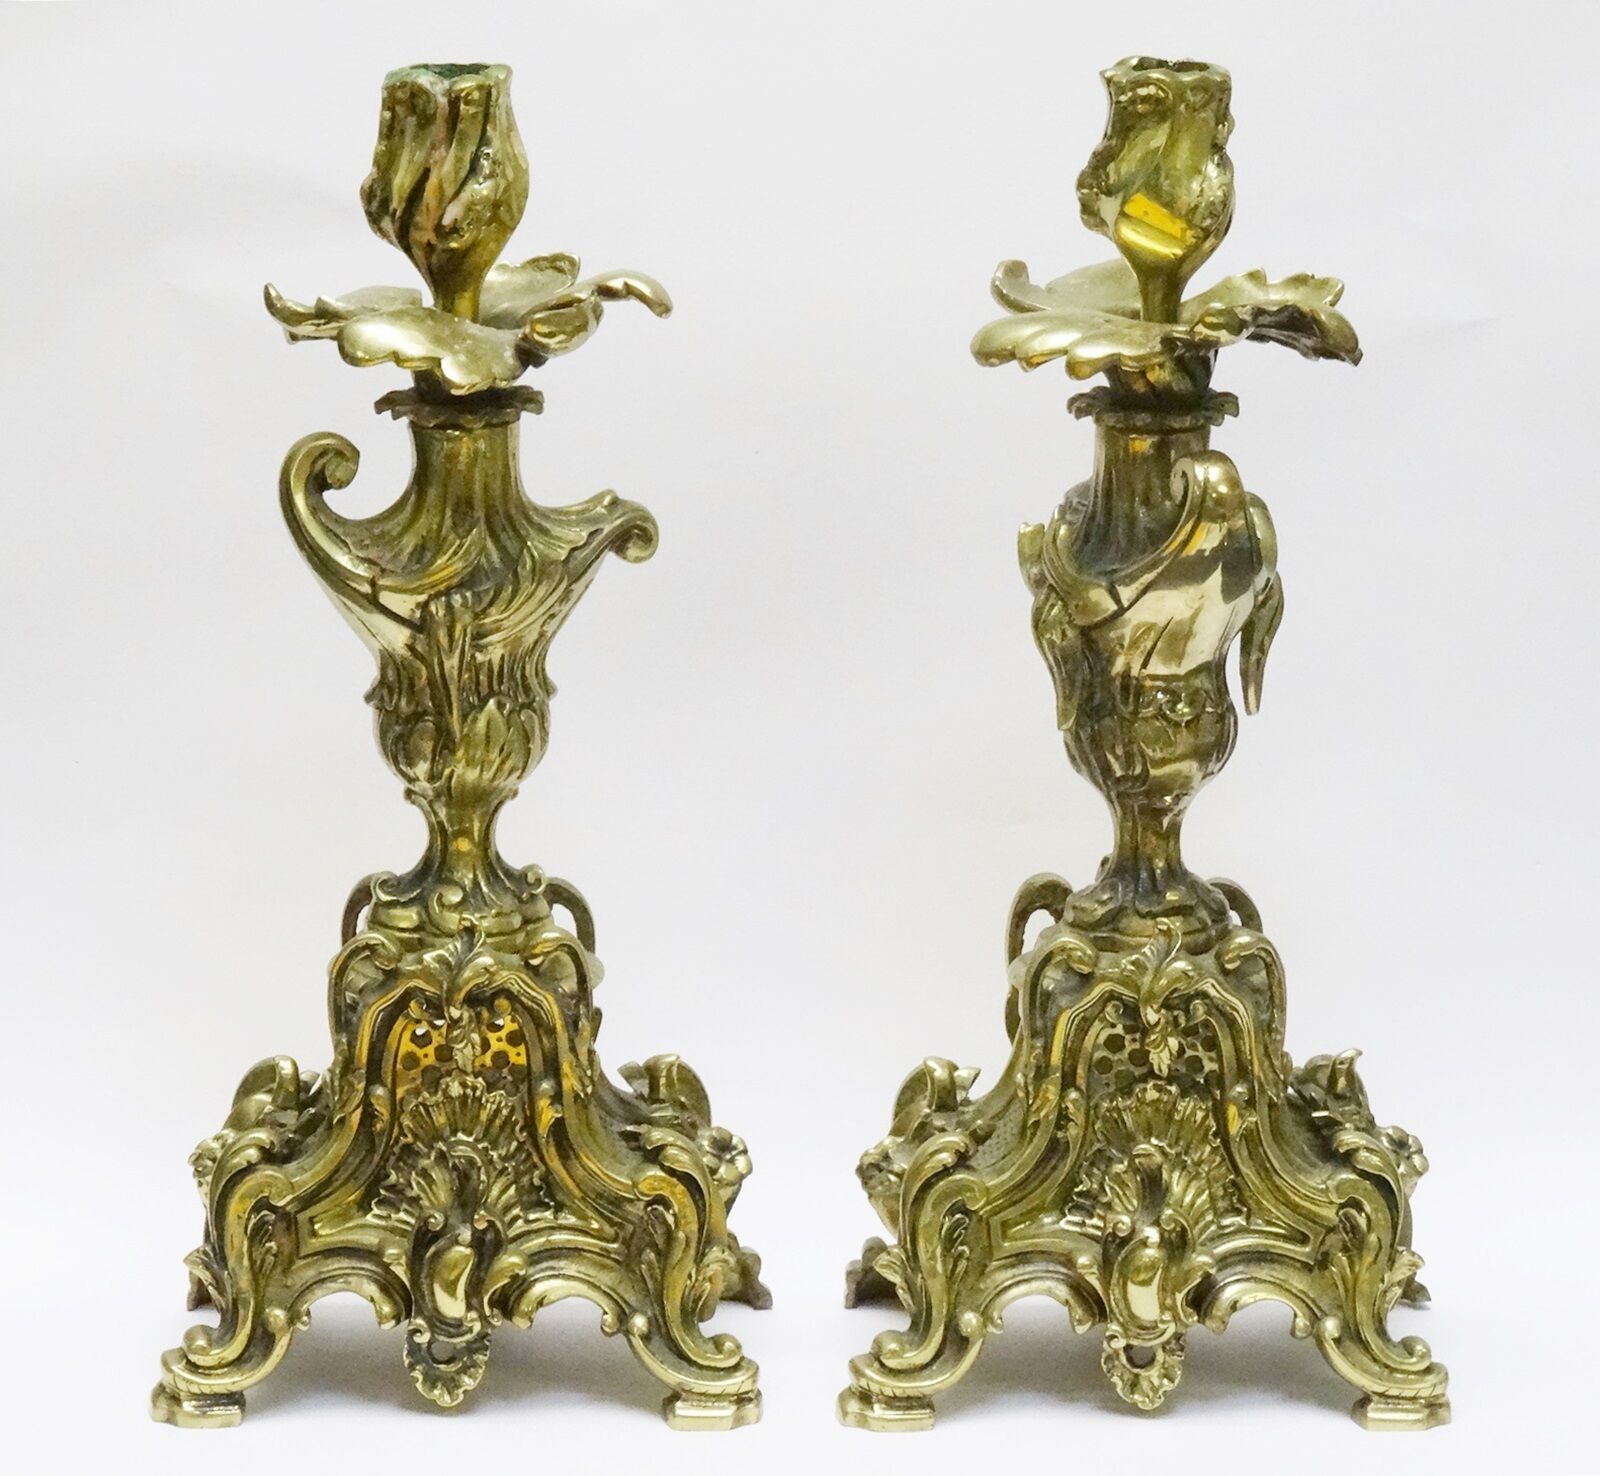 PAIR of MAGNIFICENT MASSIVE 19C FRENCH BELLE EPOQUE DORE BRONZE CANDLE HOLDER